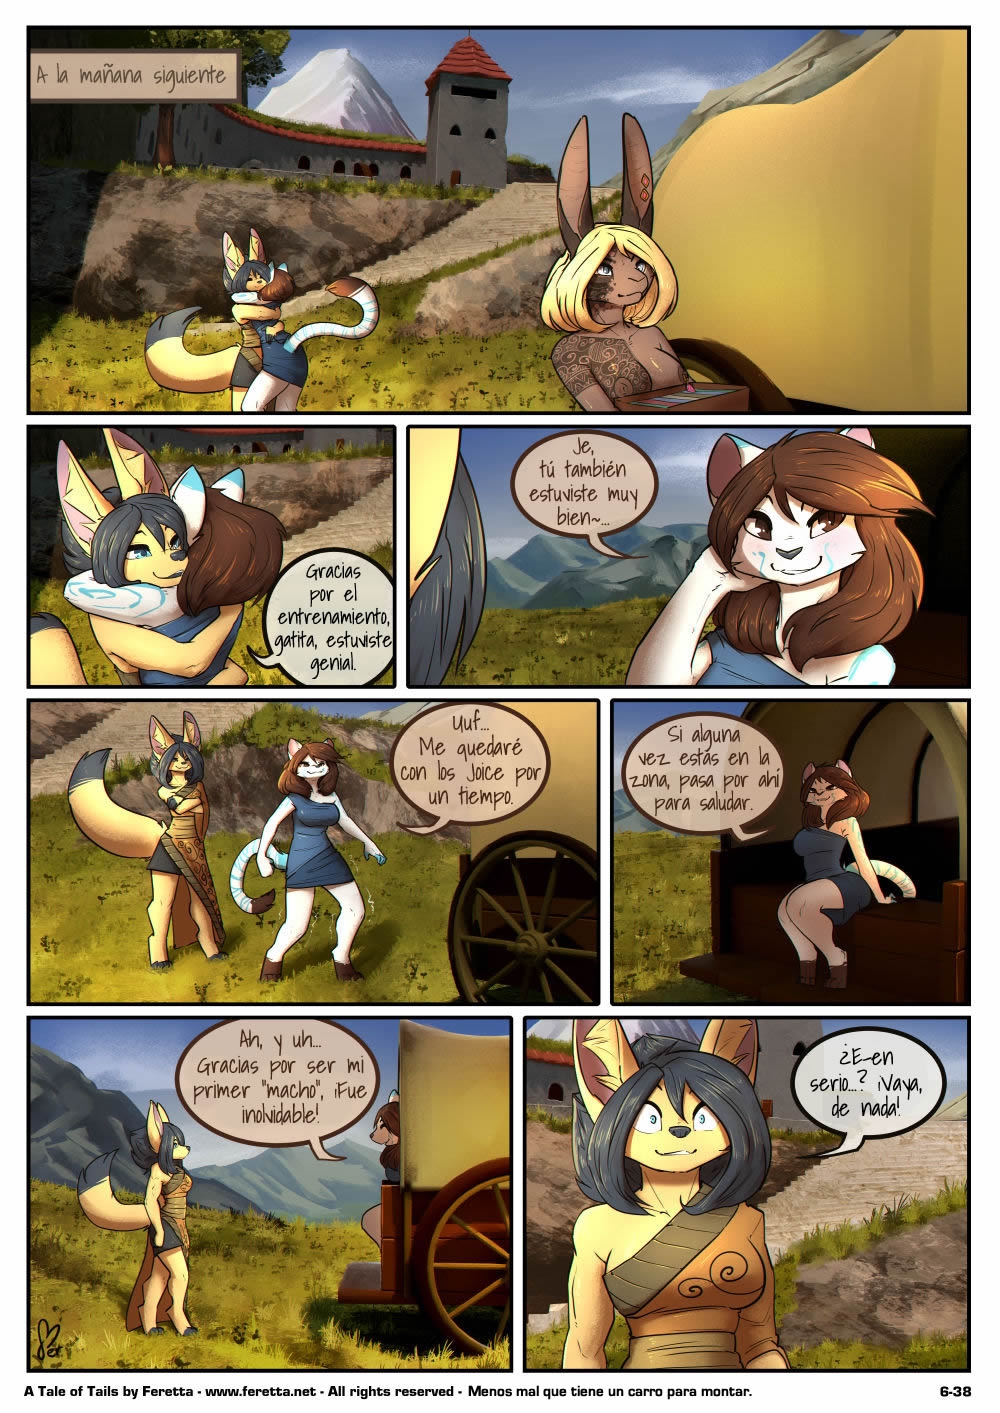 [Feretta] A Tale of Tails: Chapter 6 - Paths converge / Los caminos convergen [Spanish] [Red Fox Makkan] 38